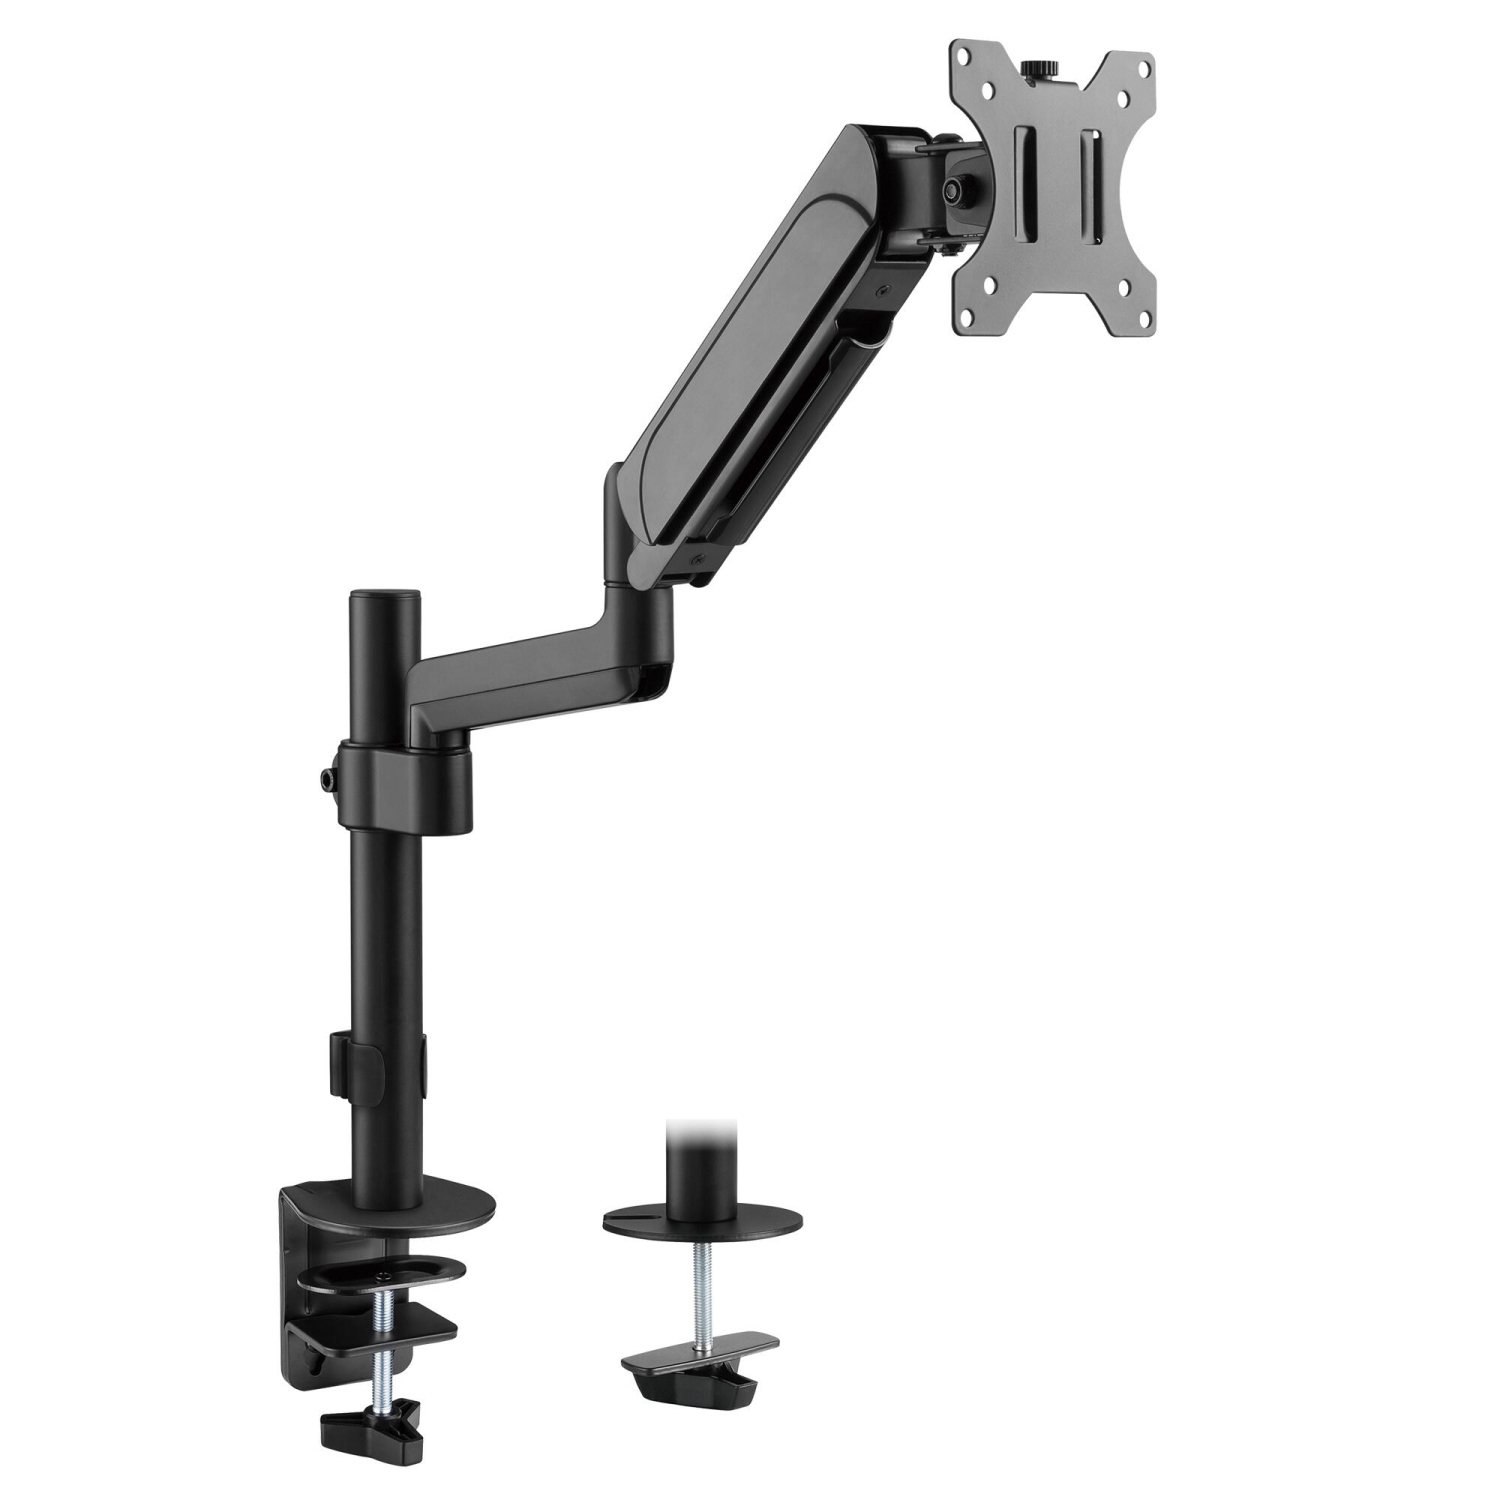 Adjustable Monitor Stands for 17" to 32" Screens, Gas Spring Single Arm Monitor Desk Mount with C Clamp and Grommet Mounting Base Hold up to 19.8lbs